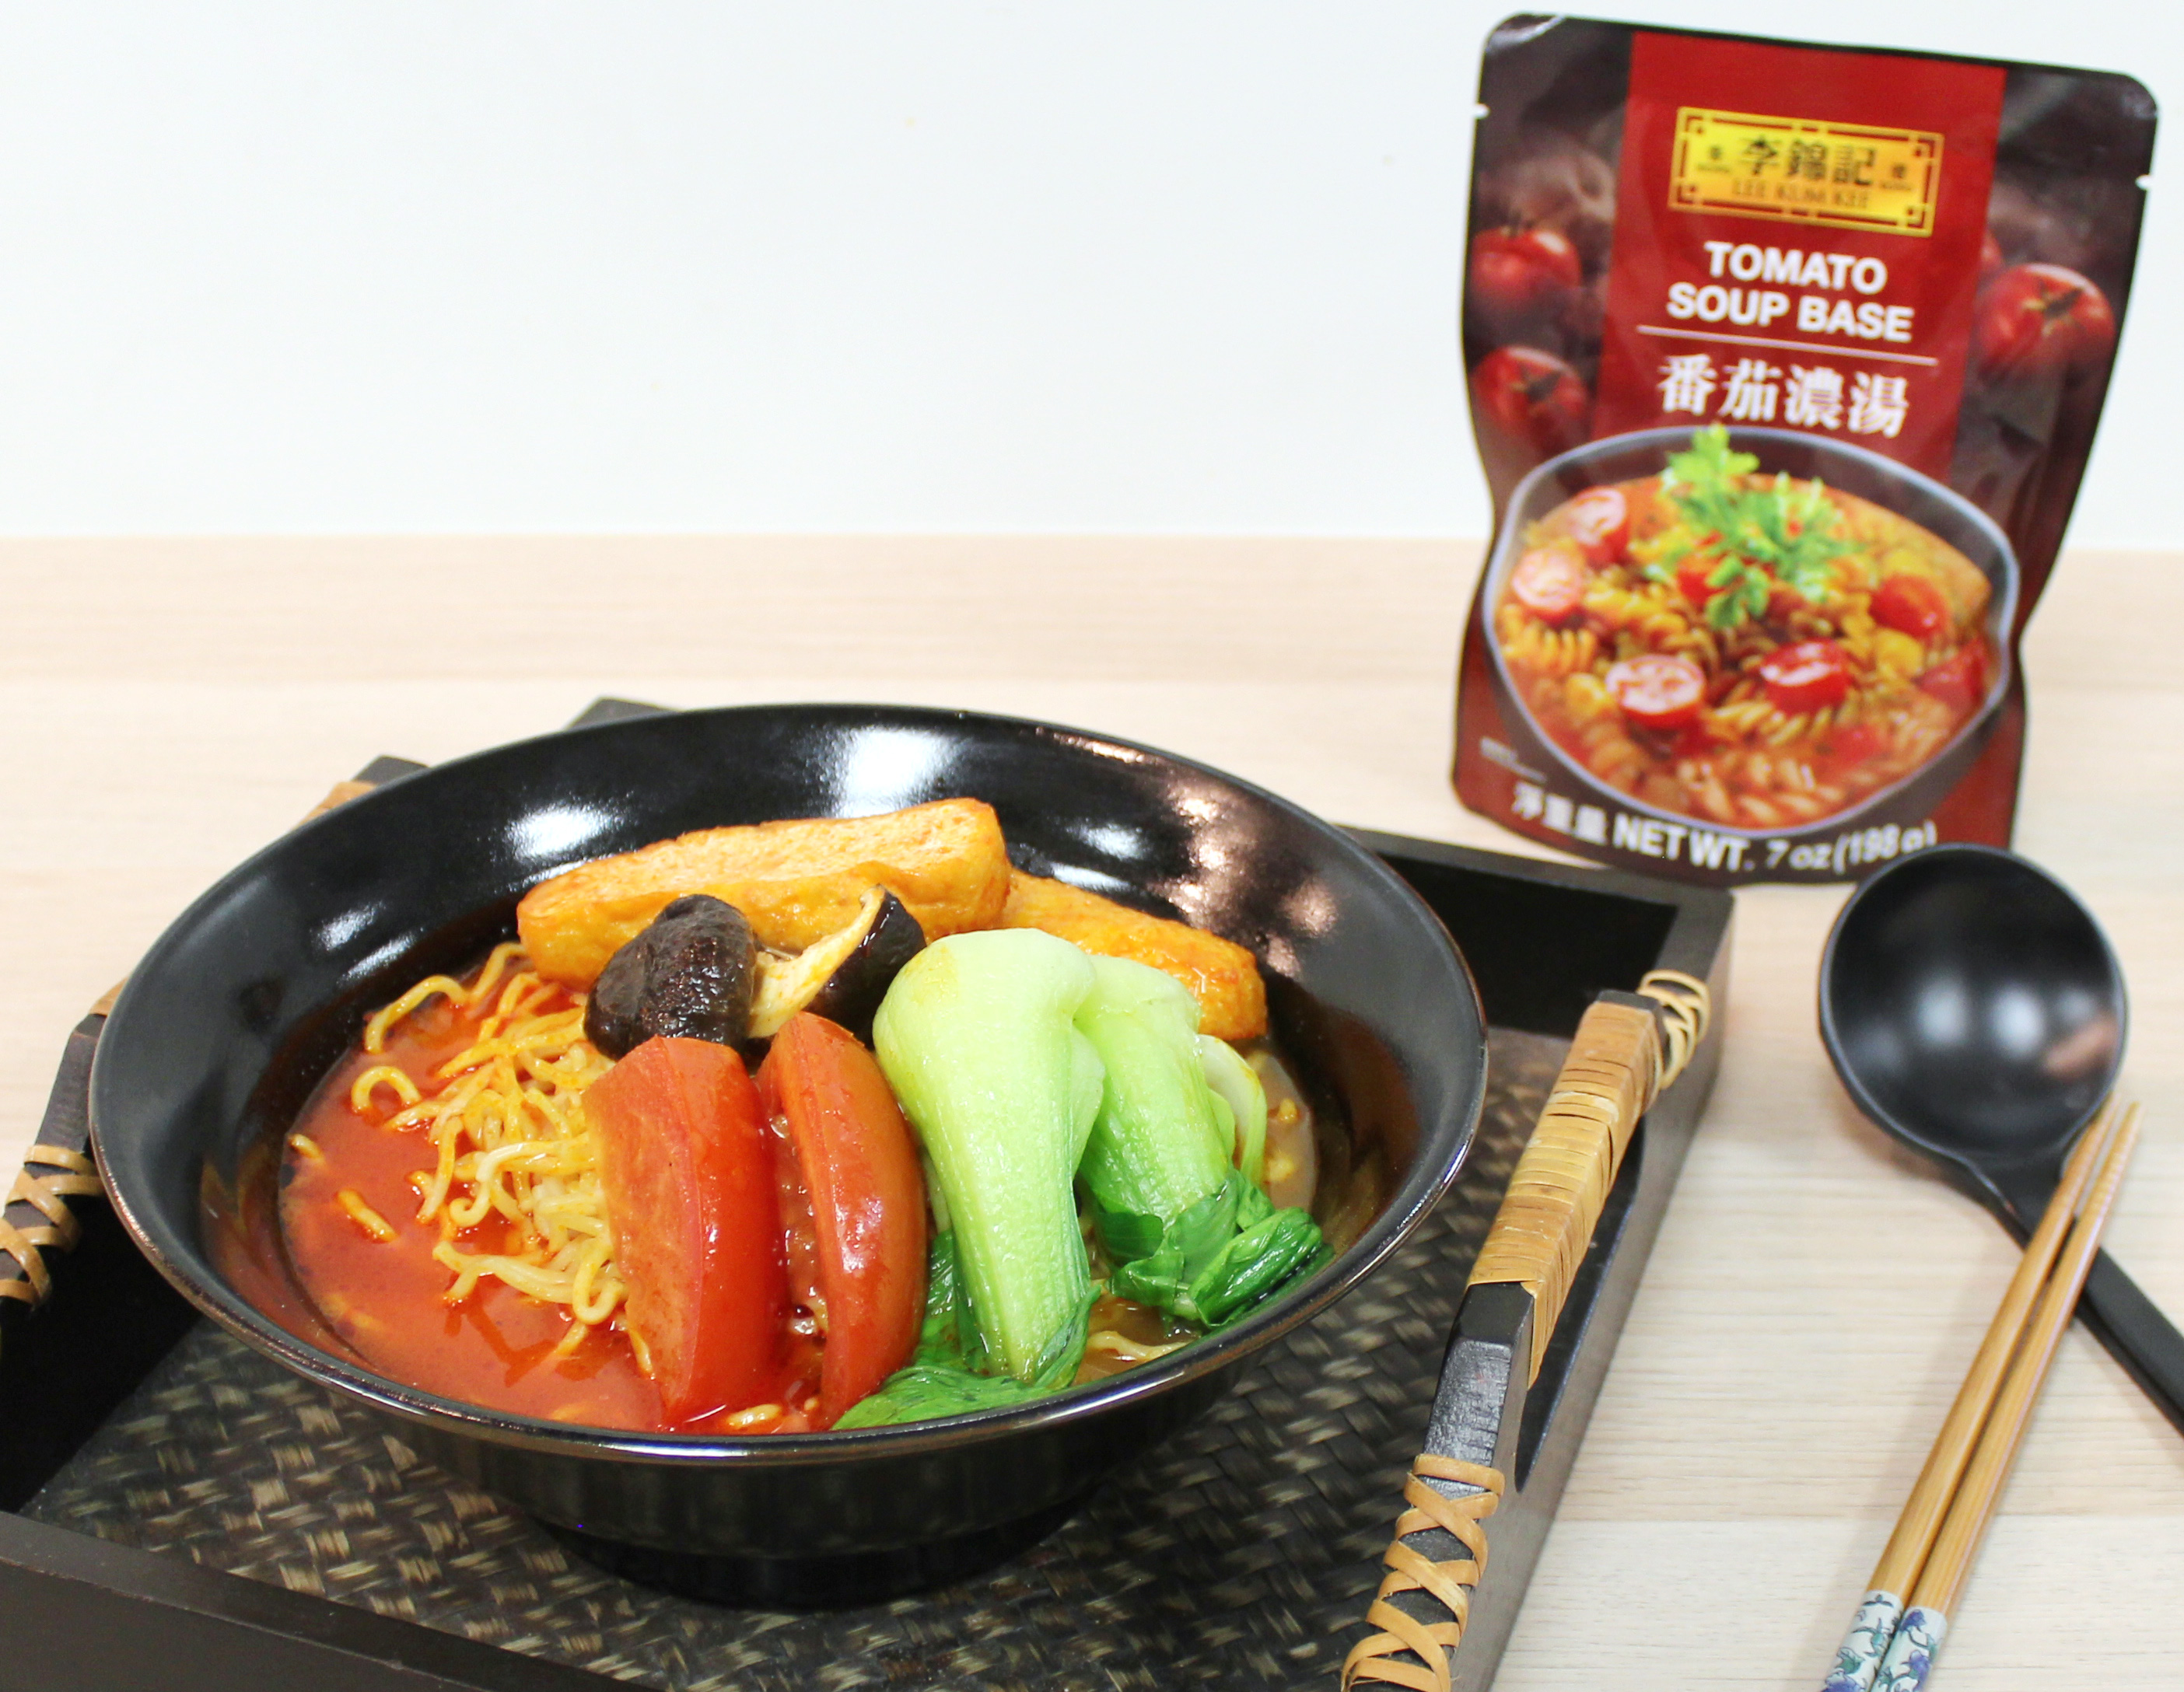 Tomato Flavor Hot Pot With Vegetables - Yihai US